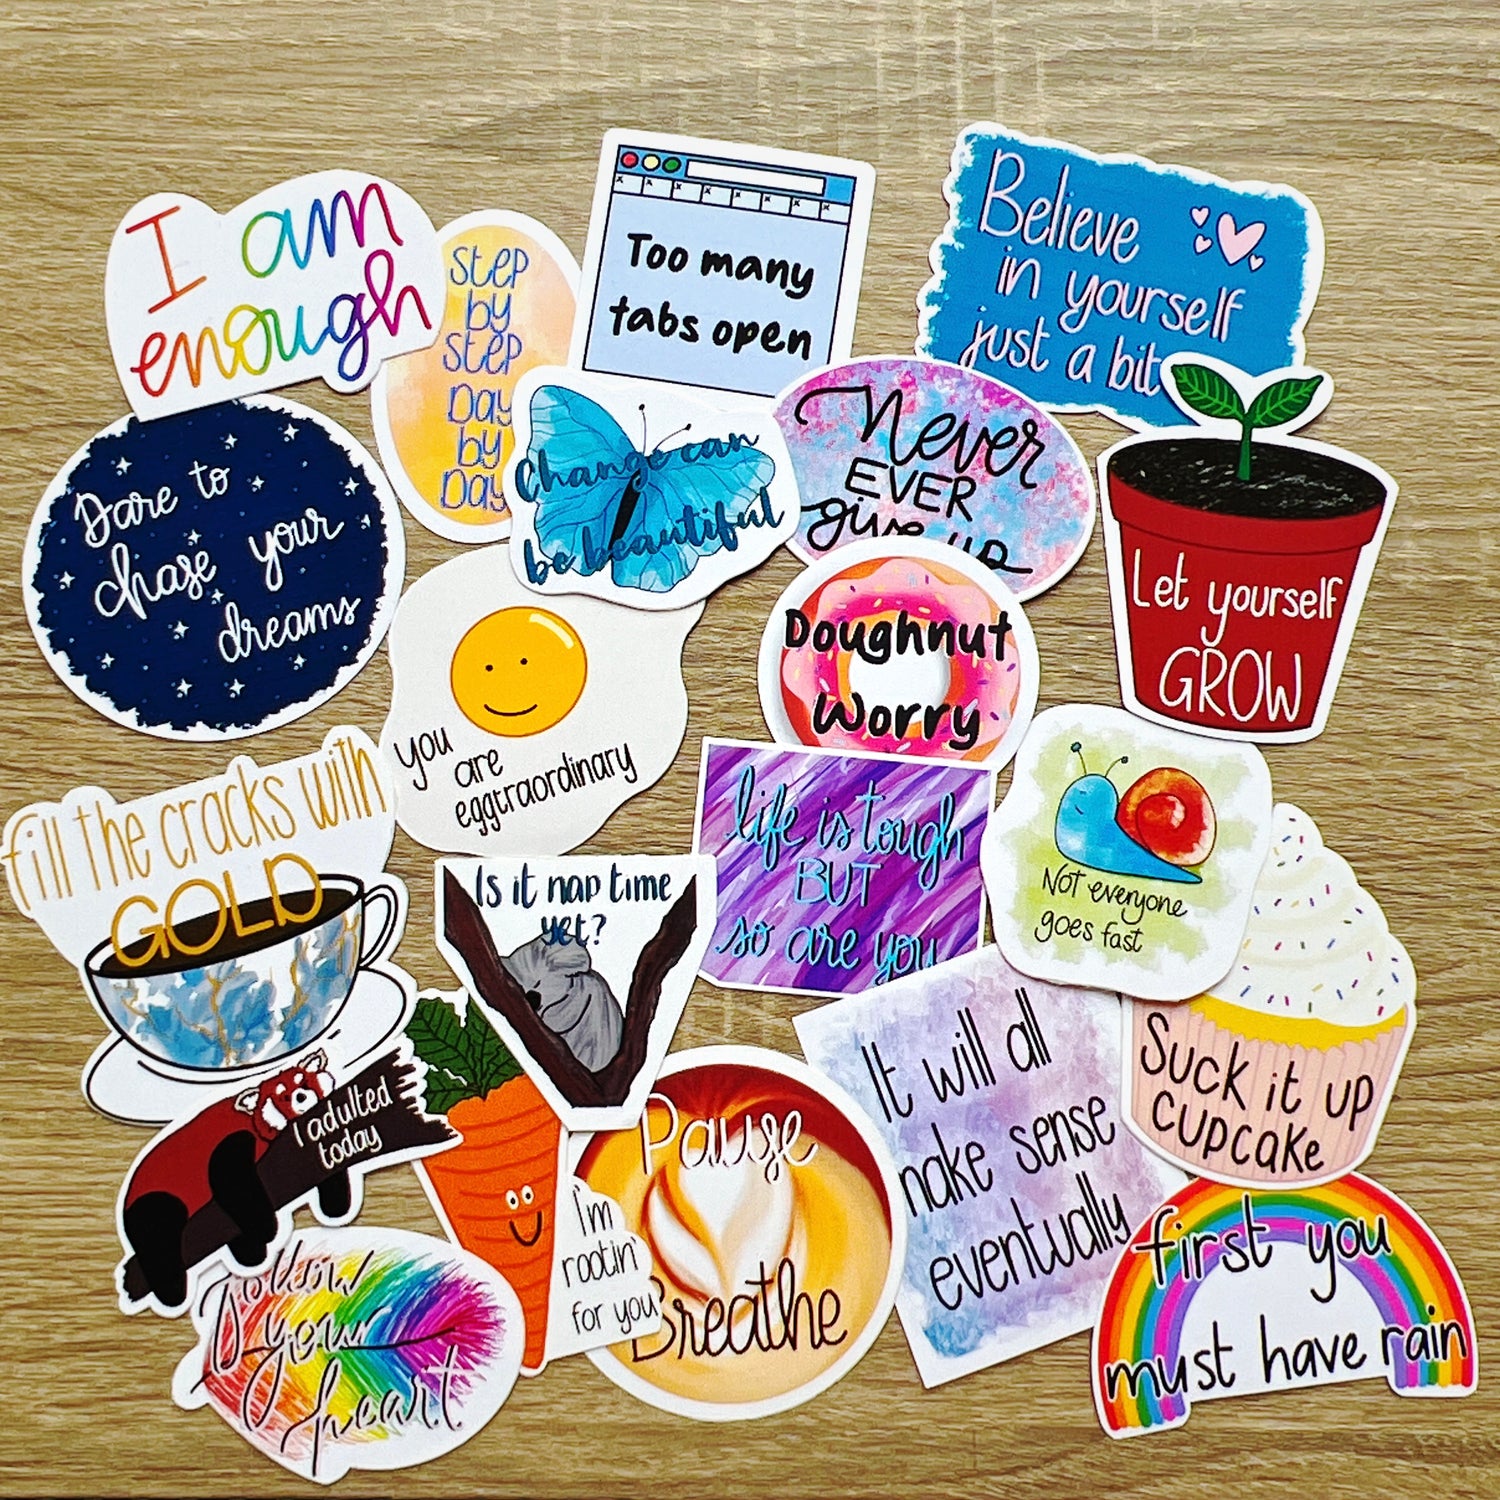 Individual Stickers